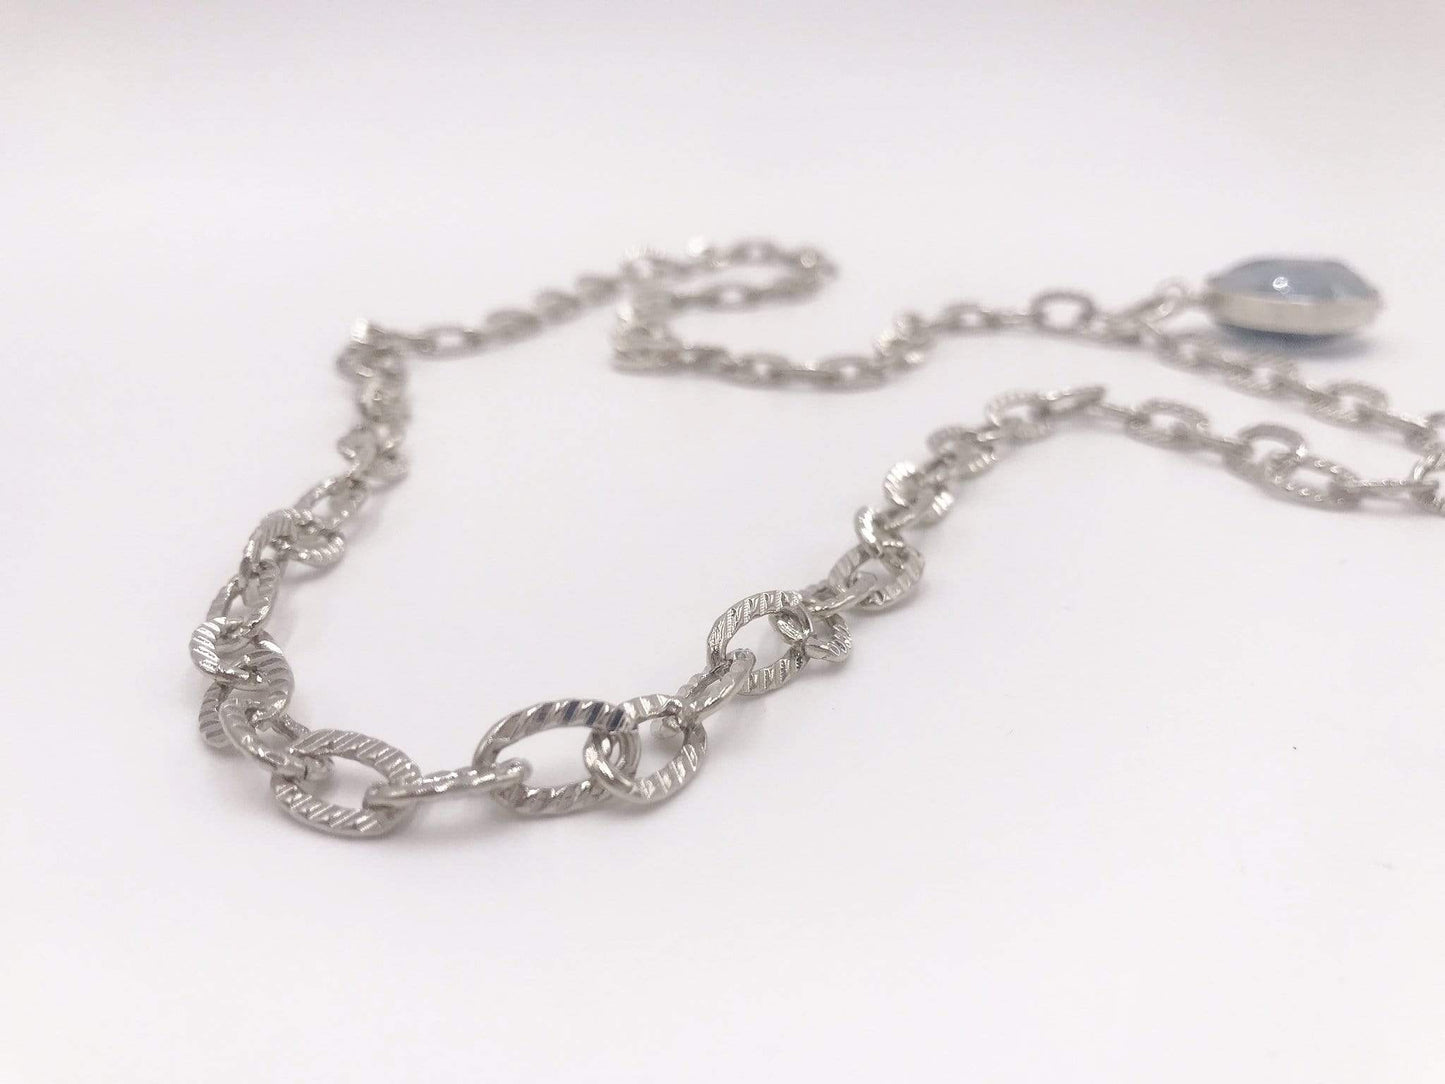 Elegant Flat Wrapped Silver Chain